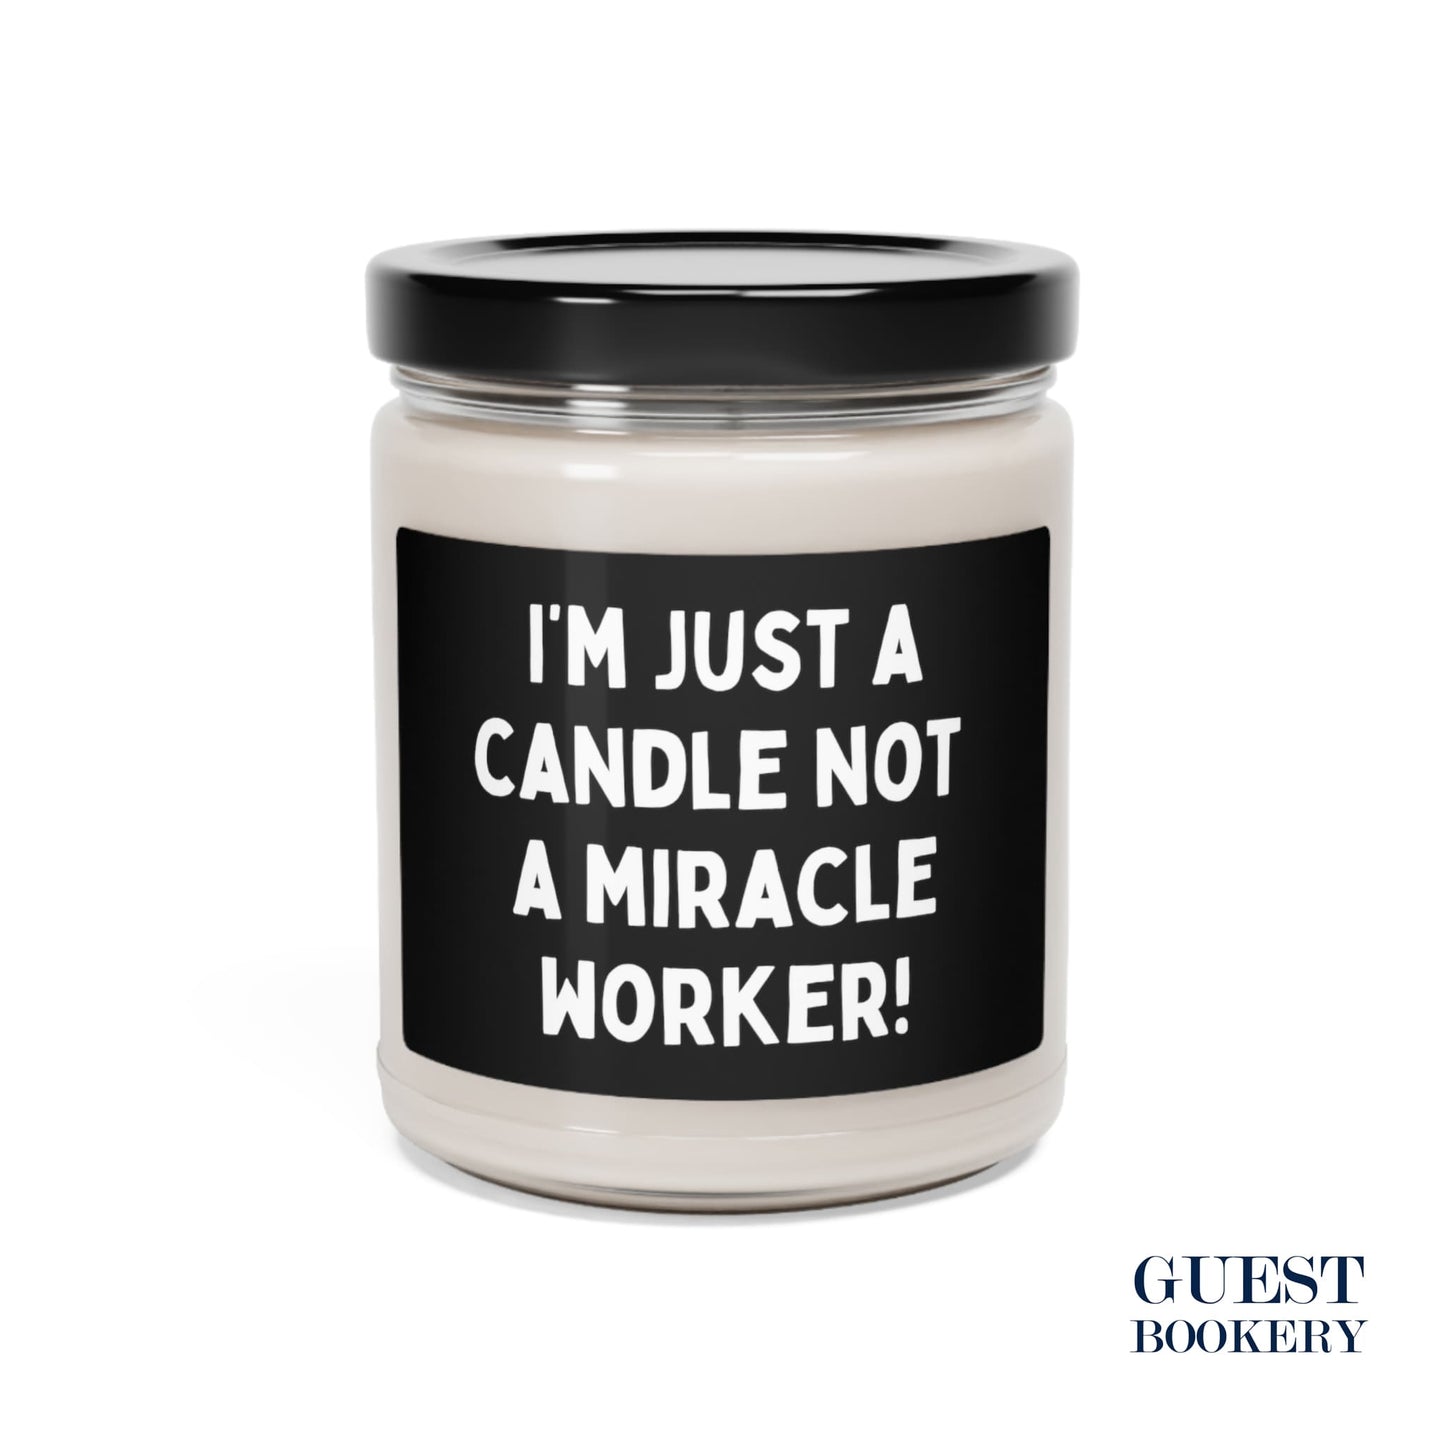 I'm Just a Candle, Not a Miracle Worker Candle